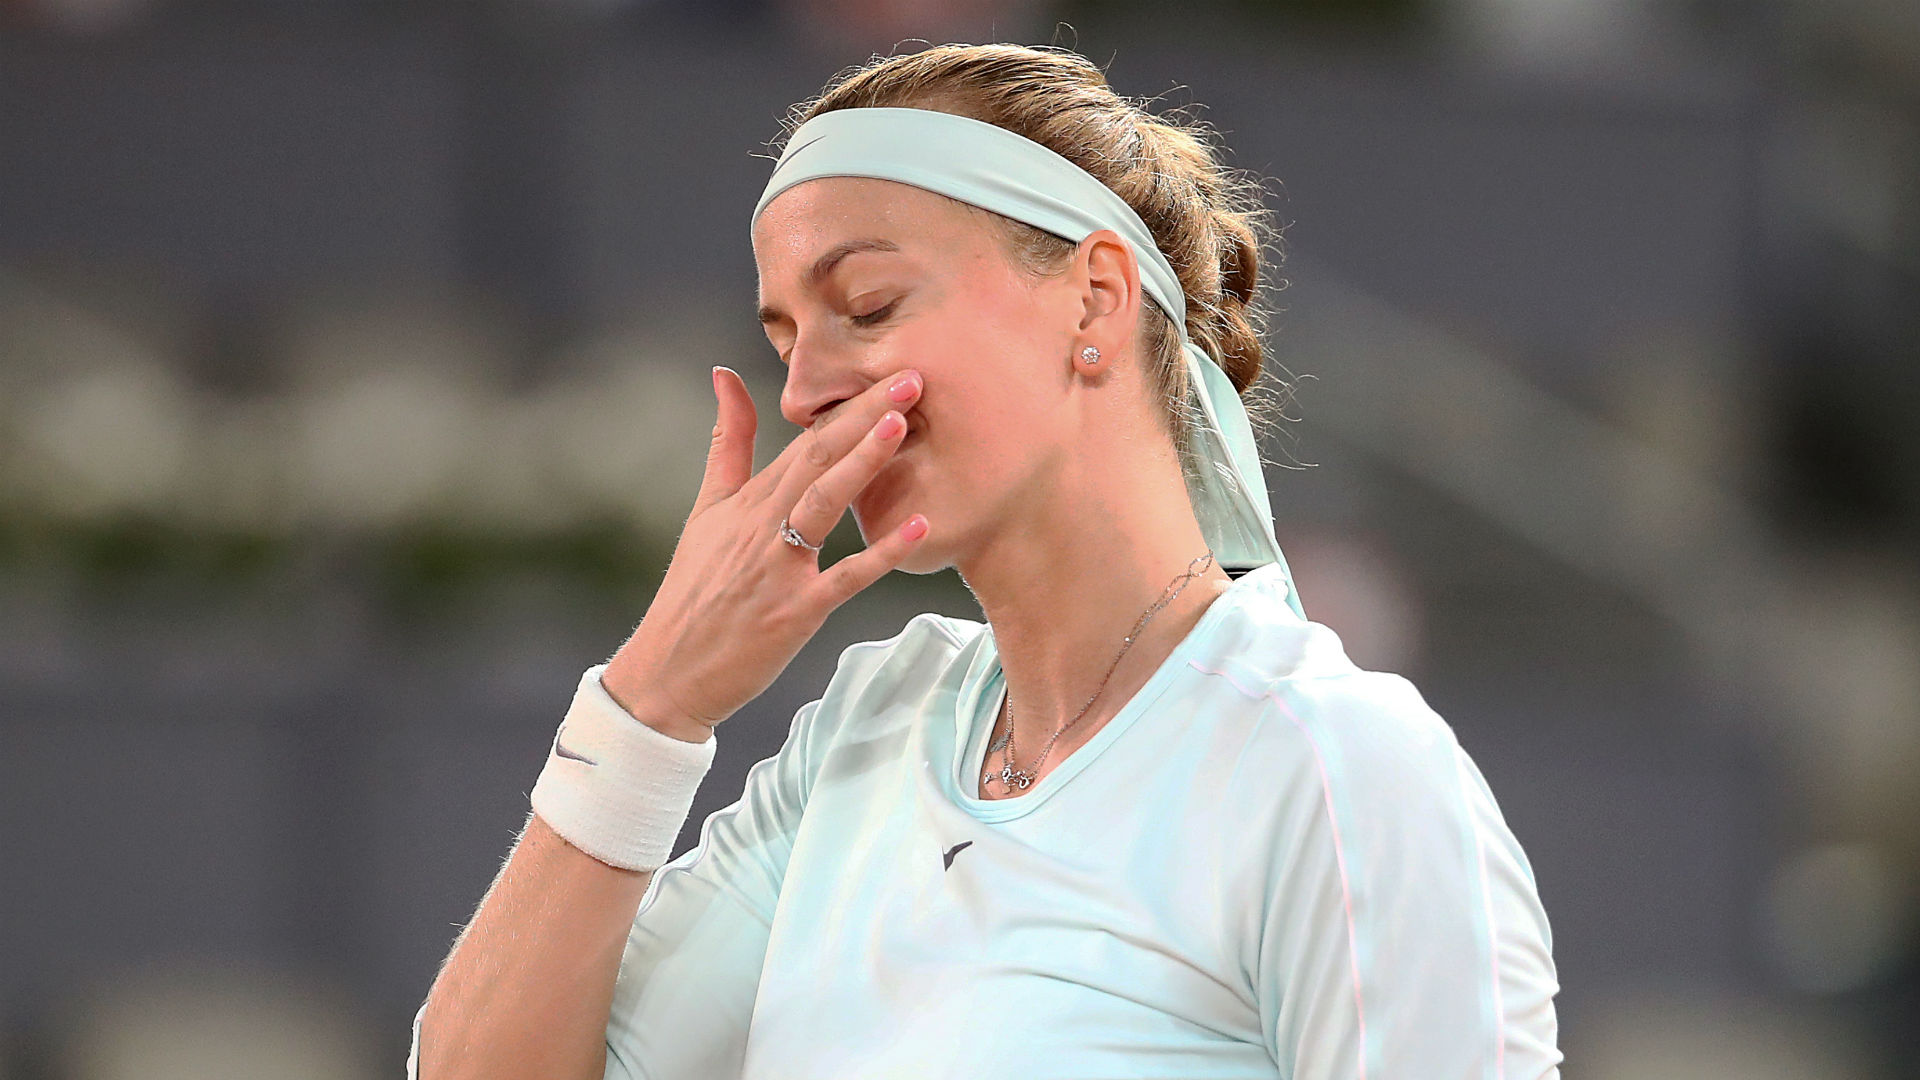 Two-time Wimbledon champion Petra Kvitova's participation in this year's event is in doubt after she withdrew from the Birmingham Classic.